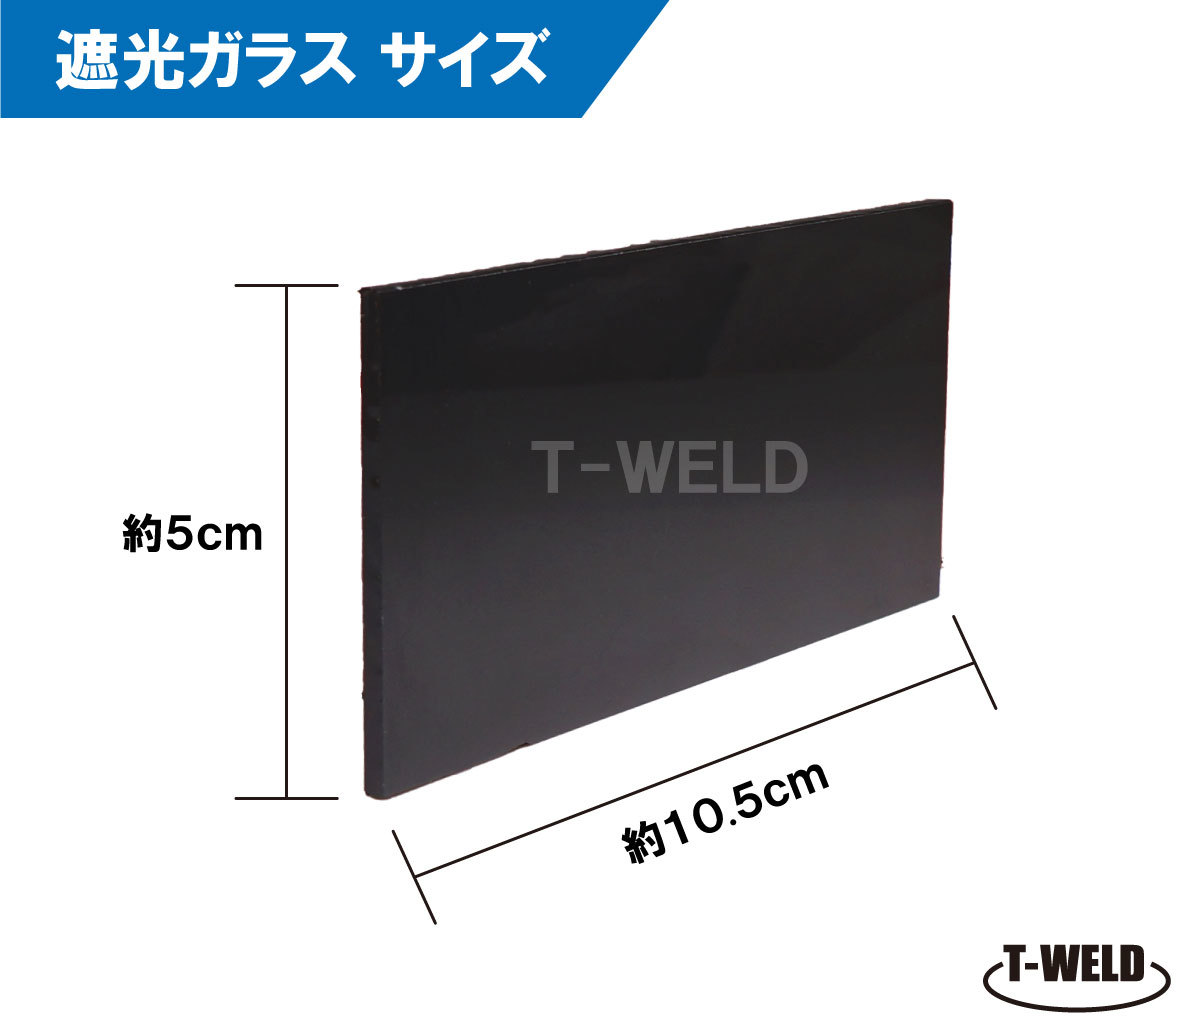  welding surface for shade glass Germany made ole k Toro glass shade times free selection ( #10 #11 ) 3 pieces set 